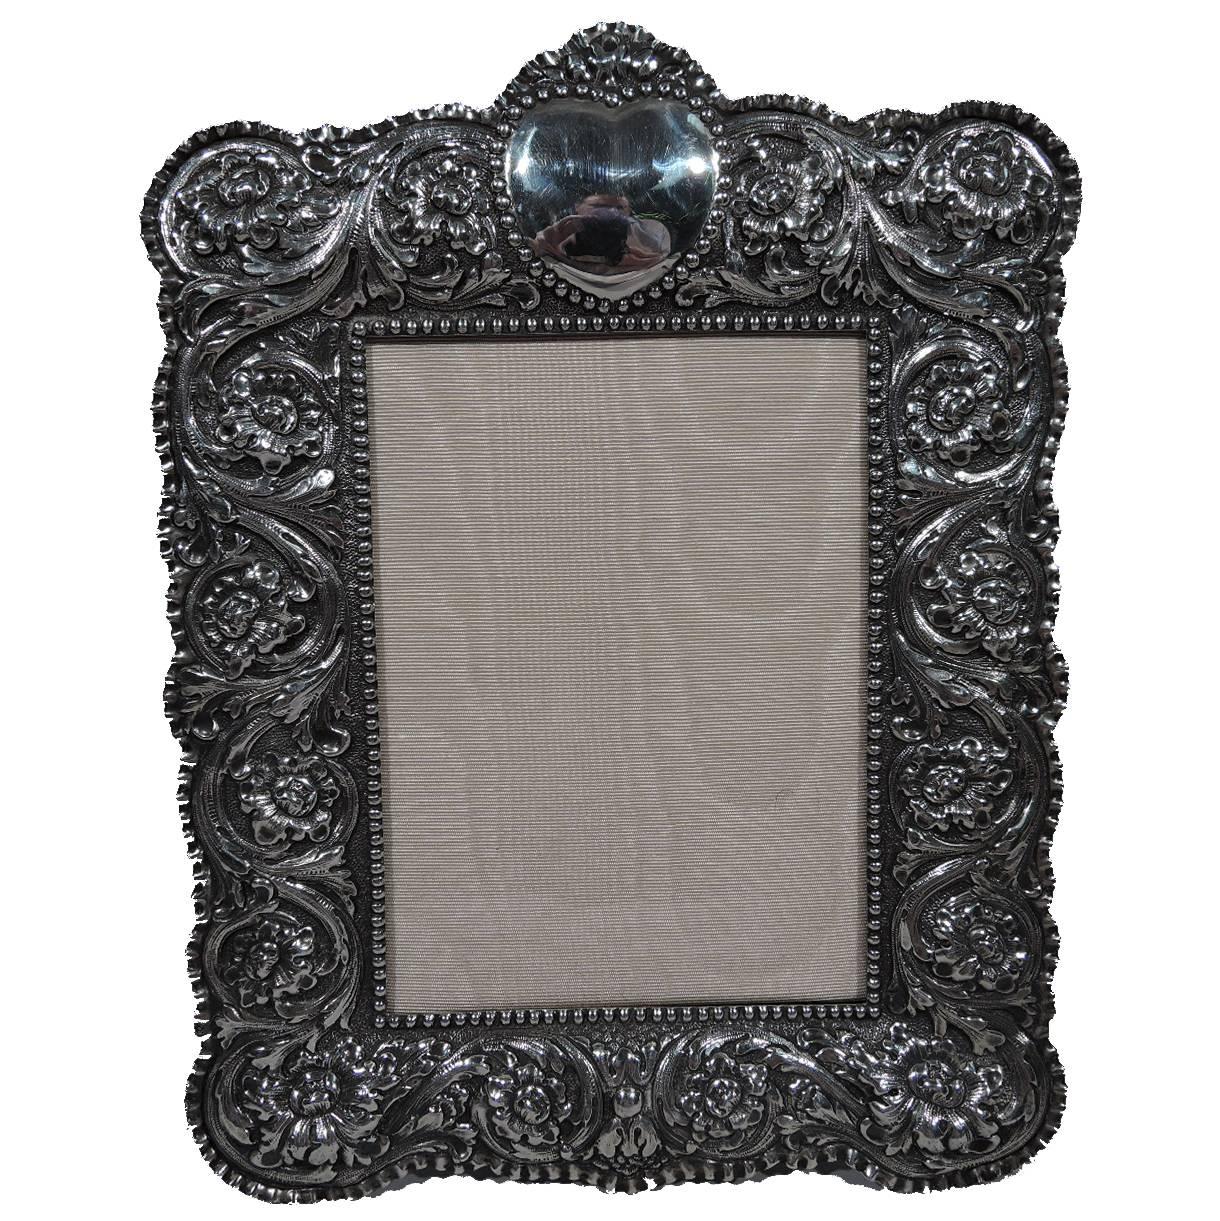 Romantic Antique Sterling Silver Picture Frame by Tiffany